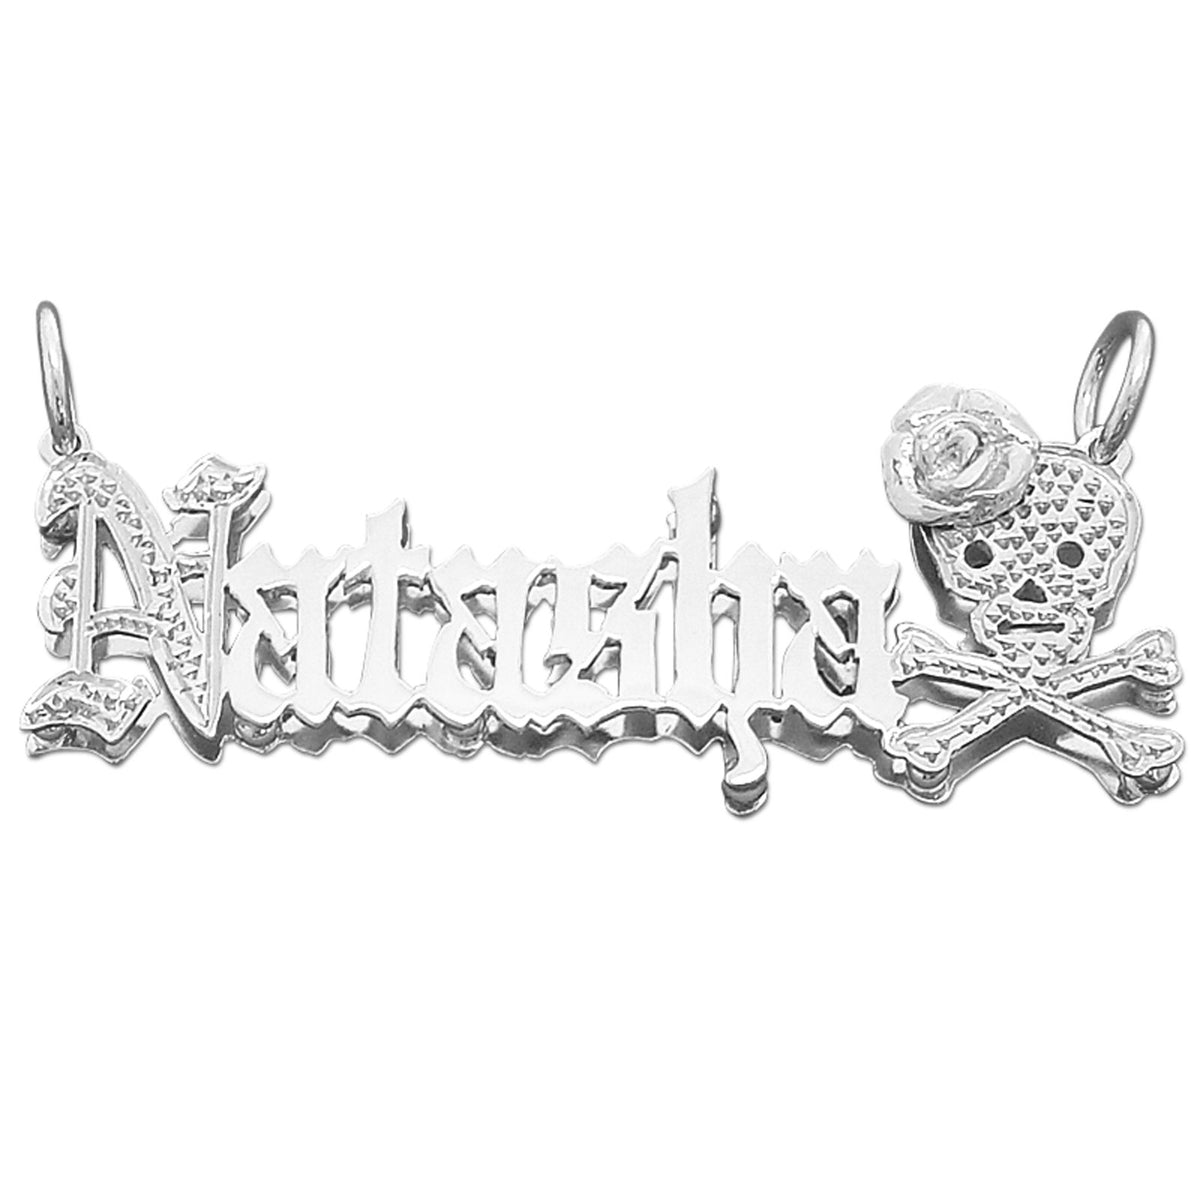 Silver 3D Double Plate Personalized Old English Name Pendant Necklace Charm Skull Crossbones